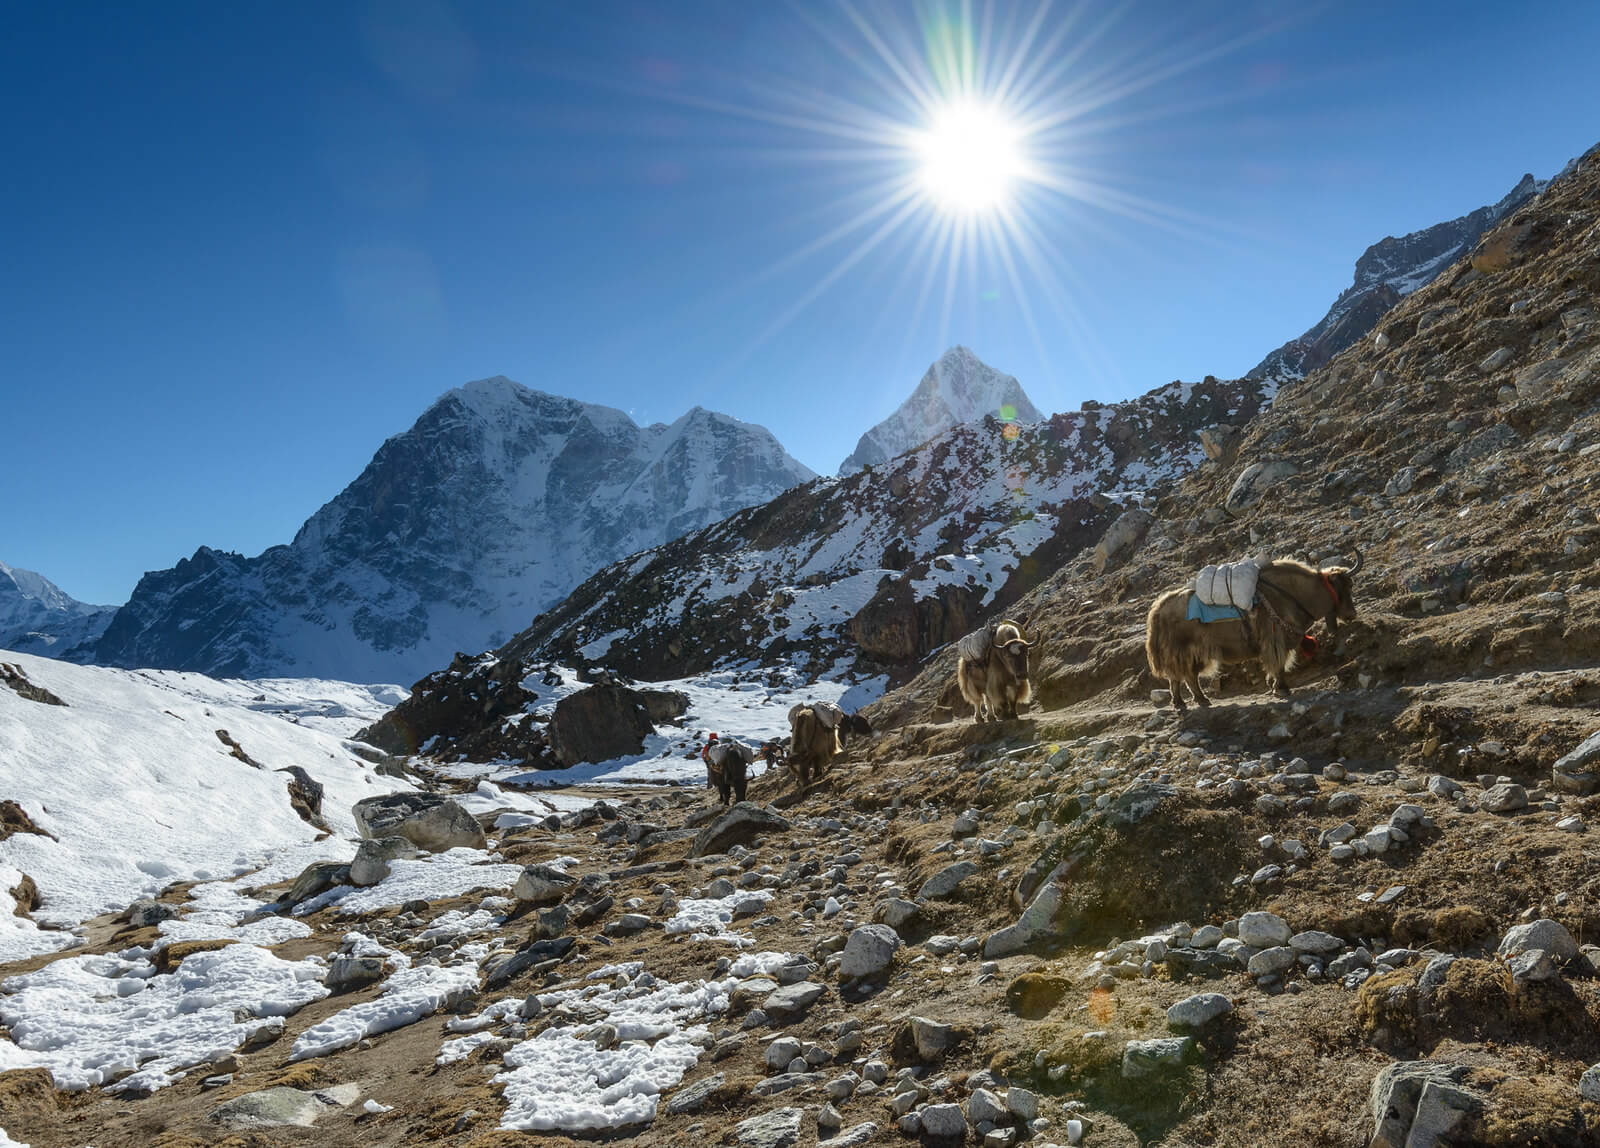 November trek to Everest Base Camp showcasing stunning mountain landscapes and clear skies